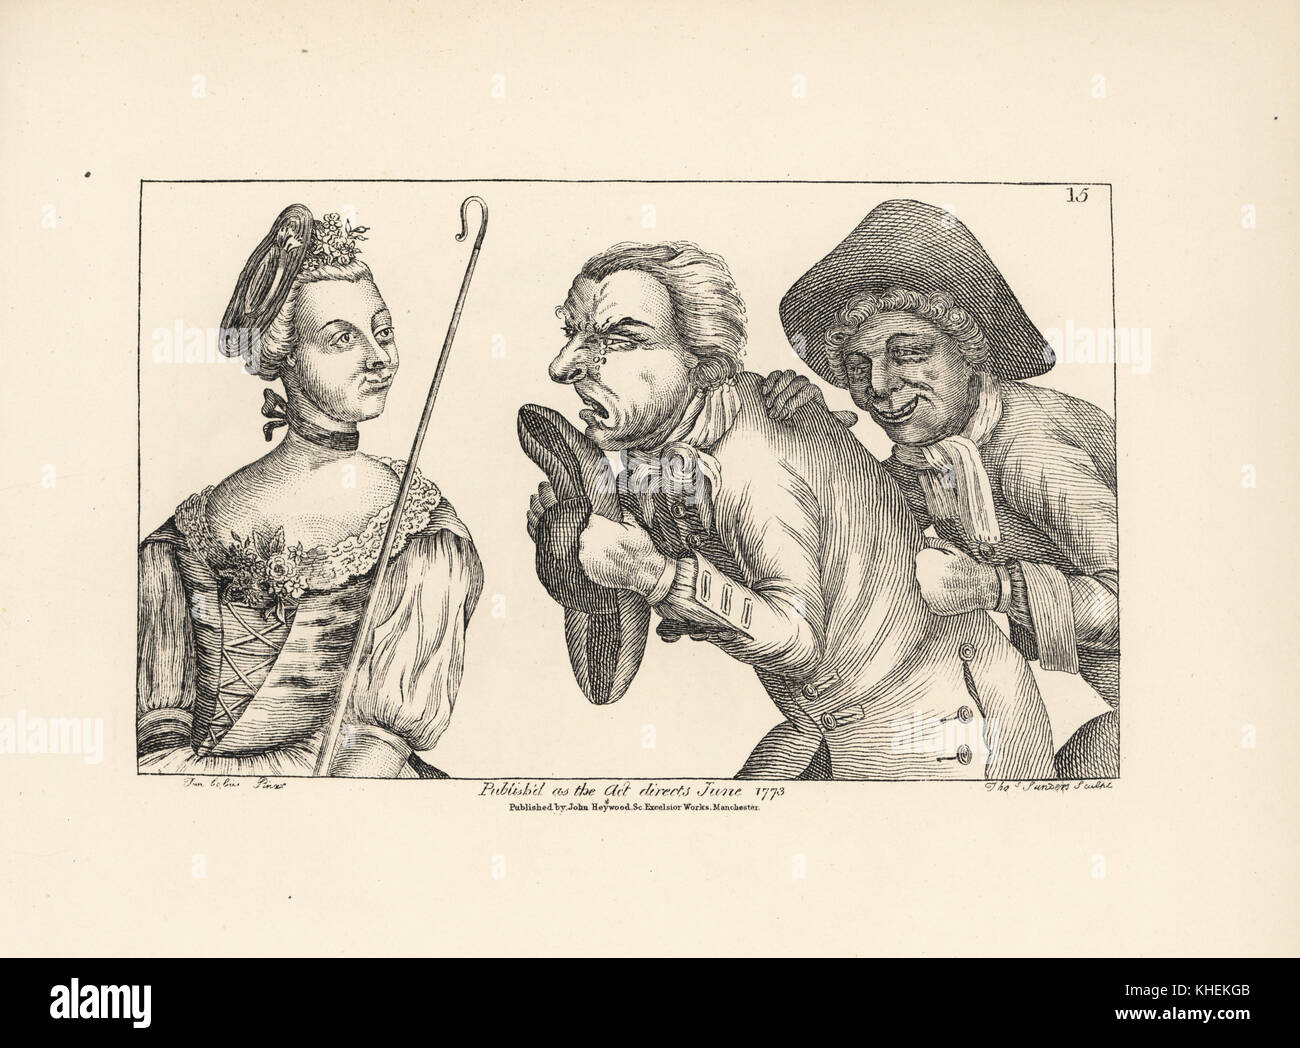 The comical figures of Simon and Mopsus with the lovely Phillida. From Colley Cibber's comic opera Damon and Phillida, 1729. Copperplate engraving by Thomas Sanders after a satirical illustration by John Collier (Timothy Bobbin) in Human Passions Delineated, John Haywood, Manchester, 1773. Stock Photo